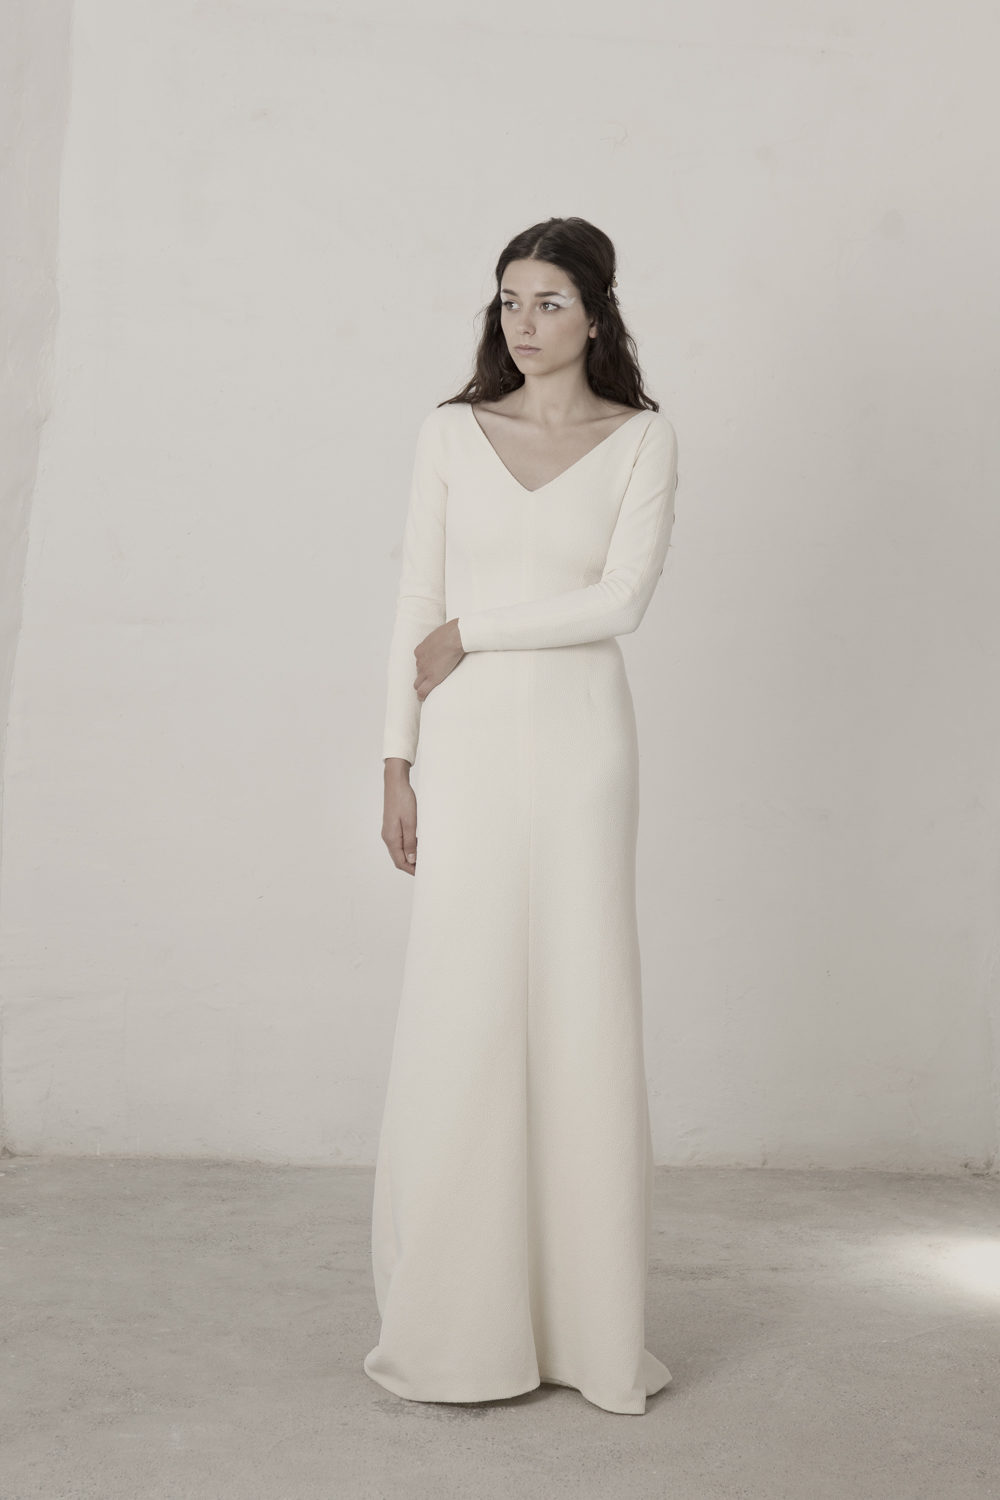 Wedding Gowns: Clean Lines